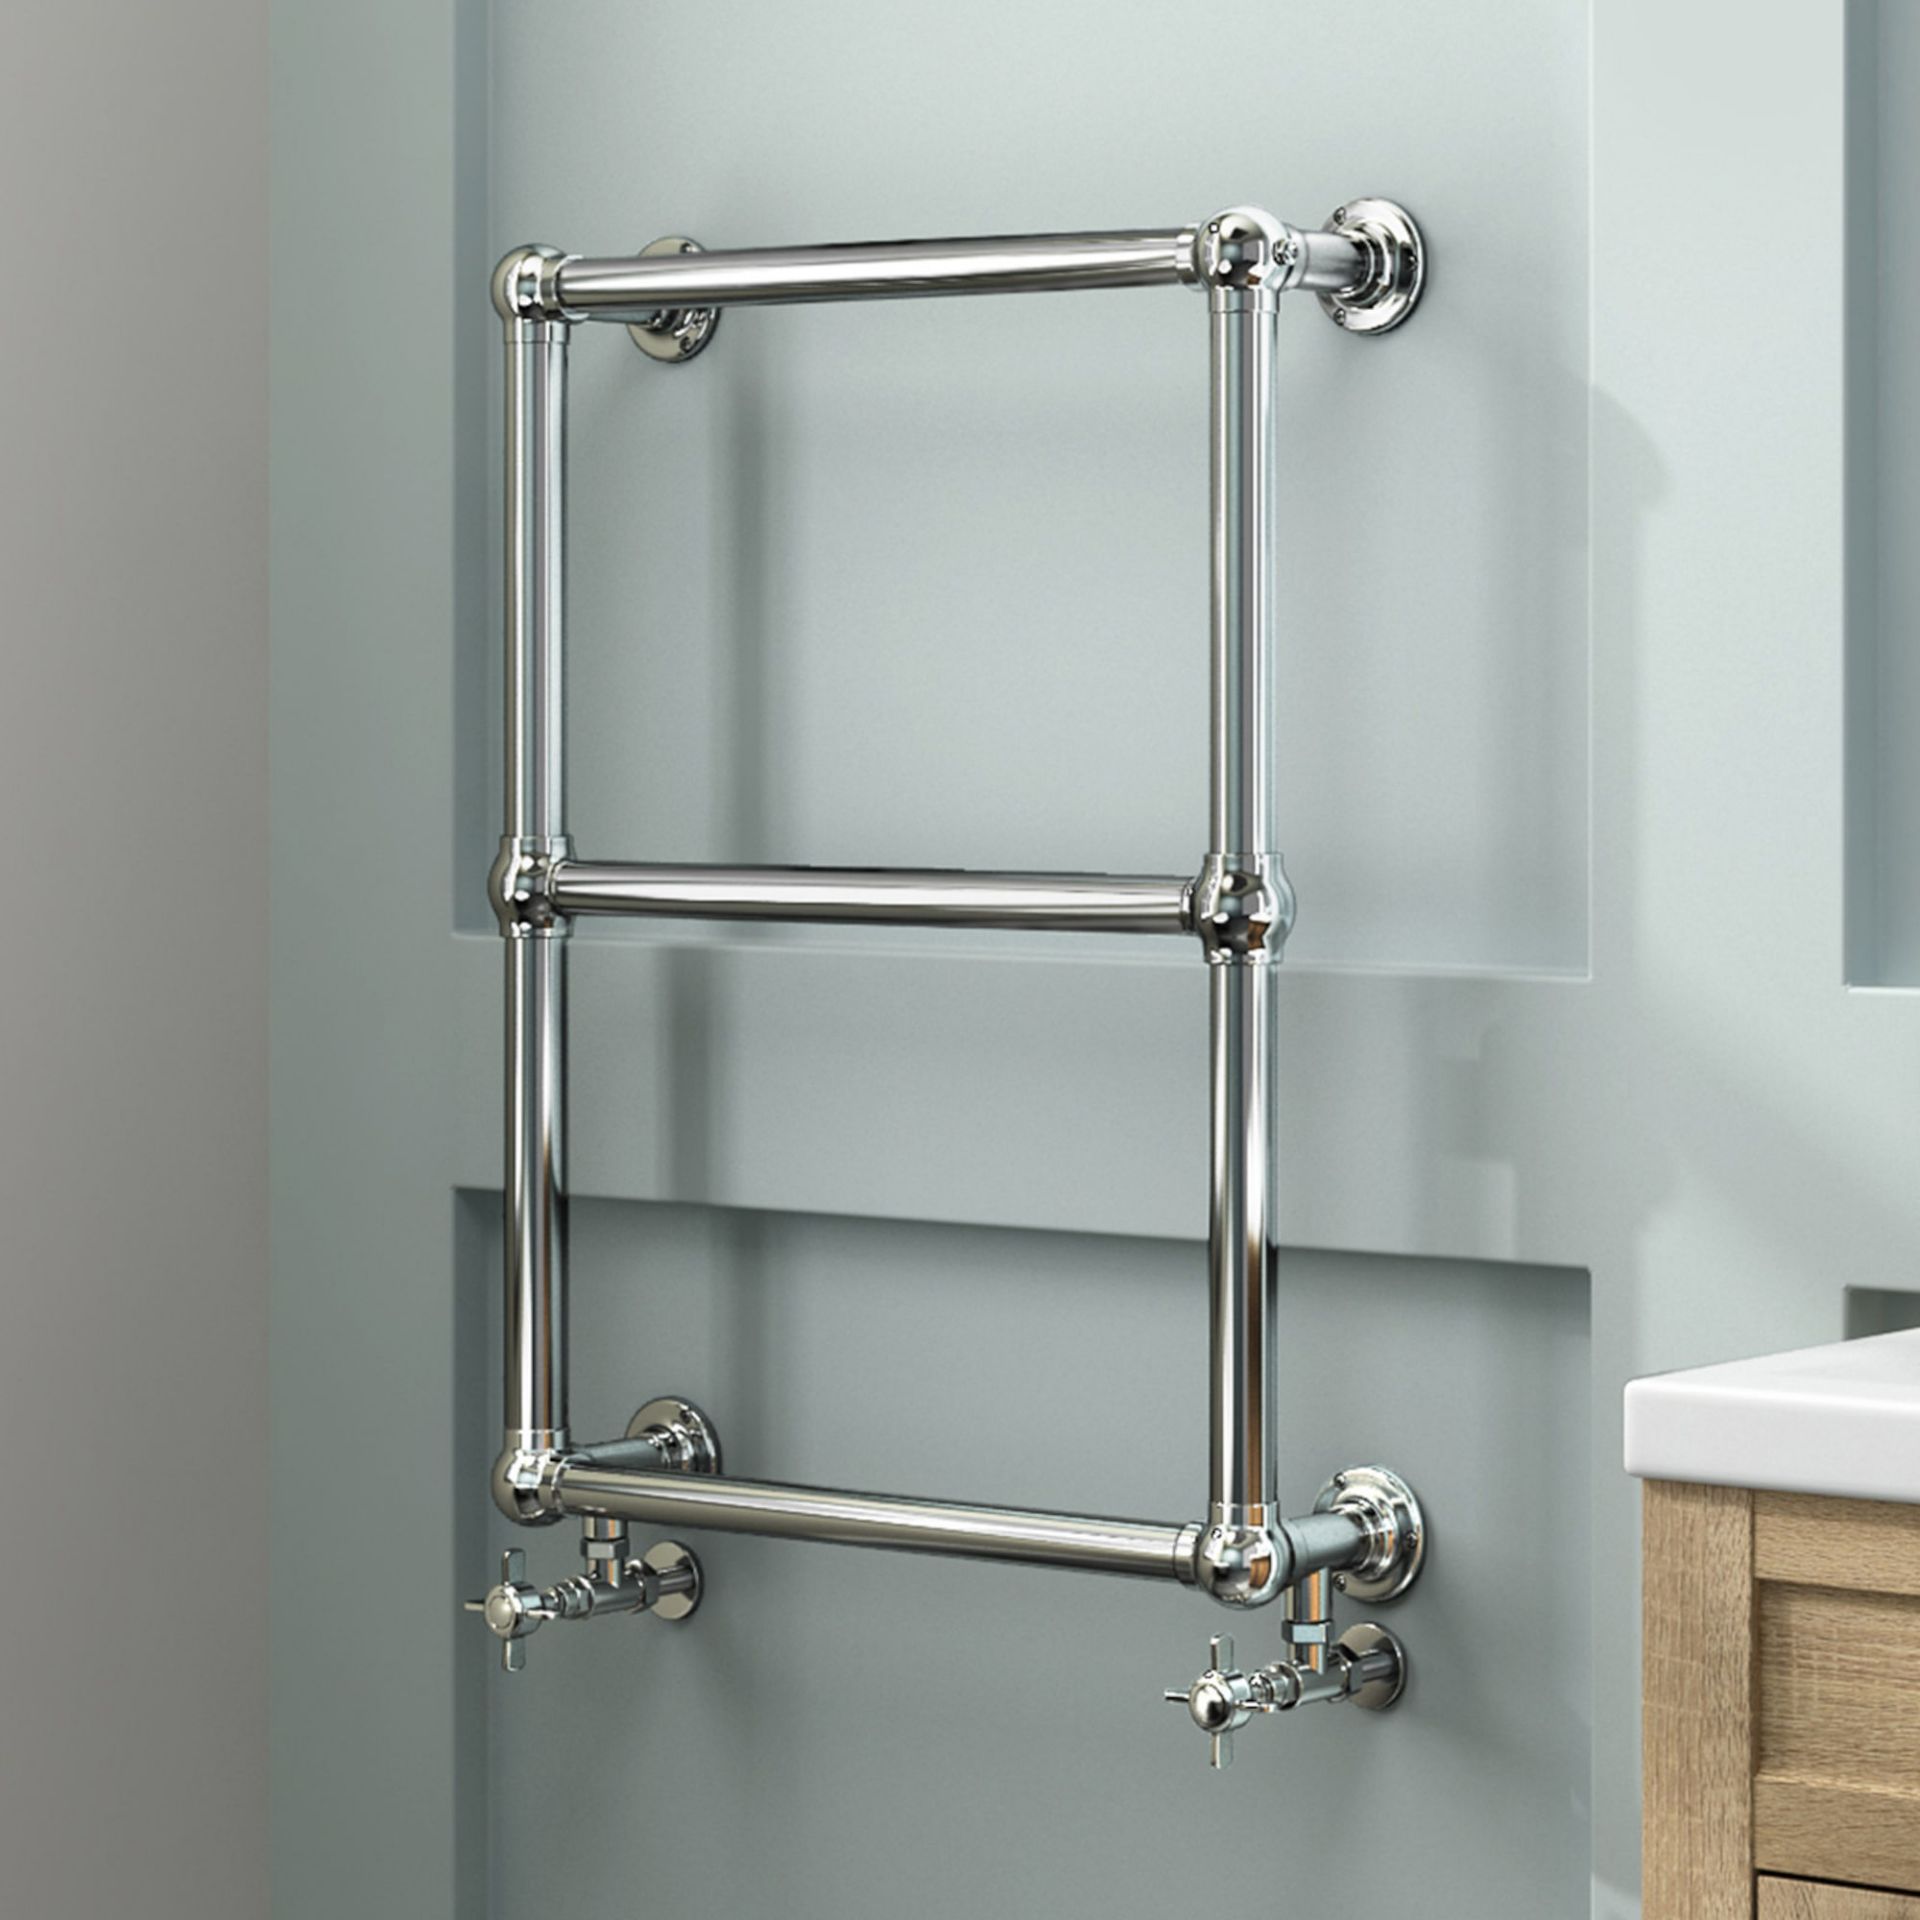 (LP67) 695x598mm Traditional Chrome Wall Mounted Towel Rail Radiator - Cambridge. RRP £439.99. For